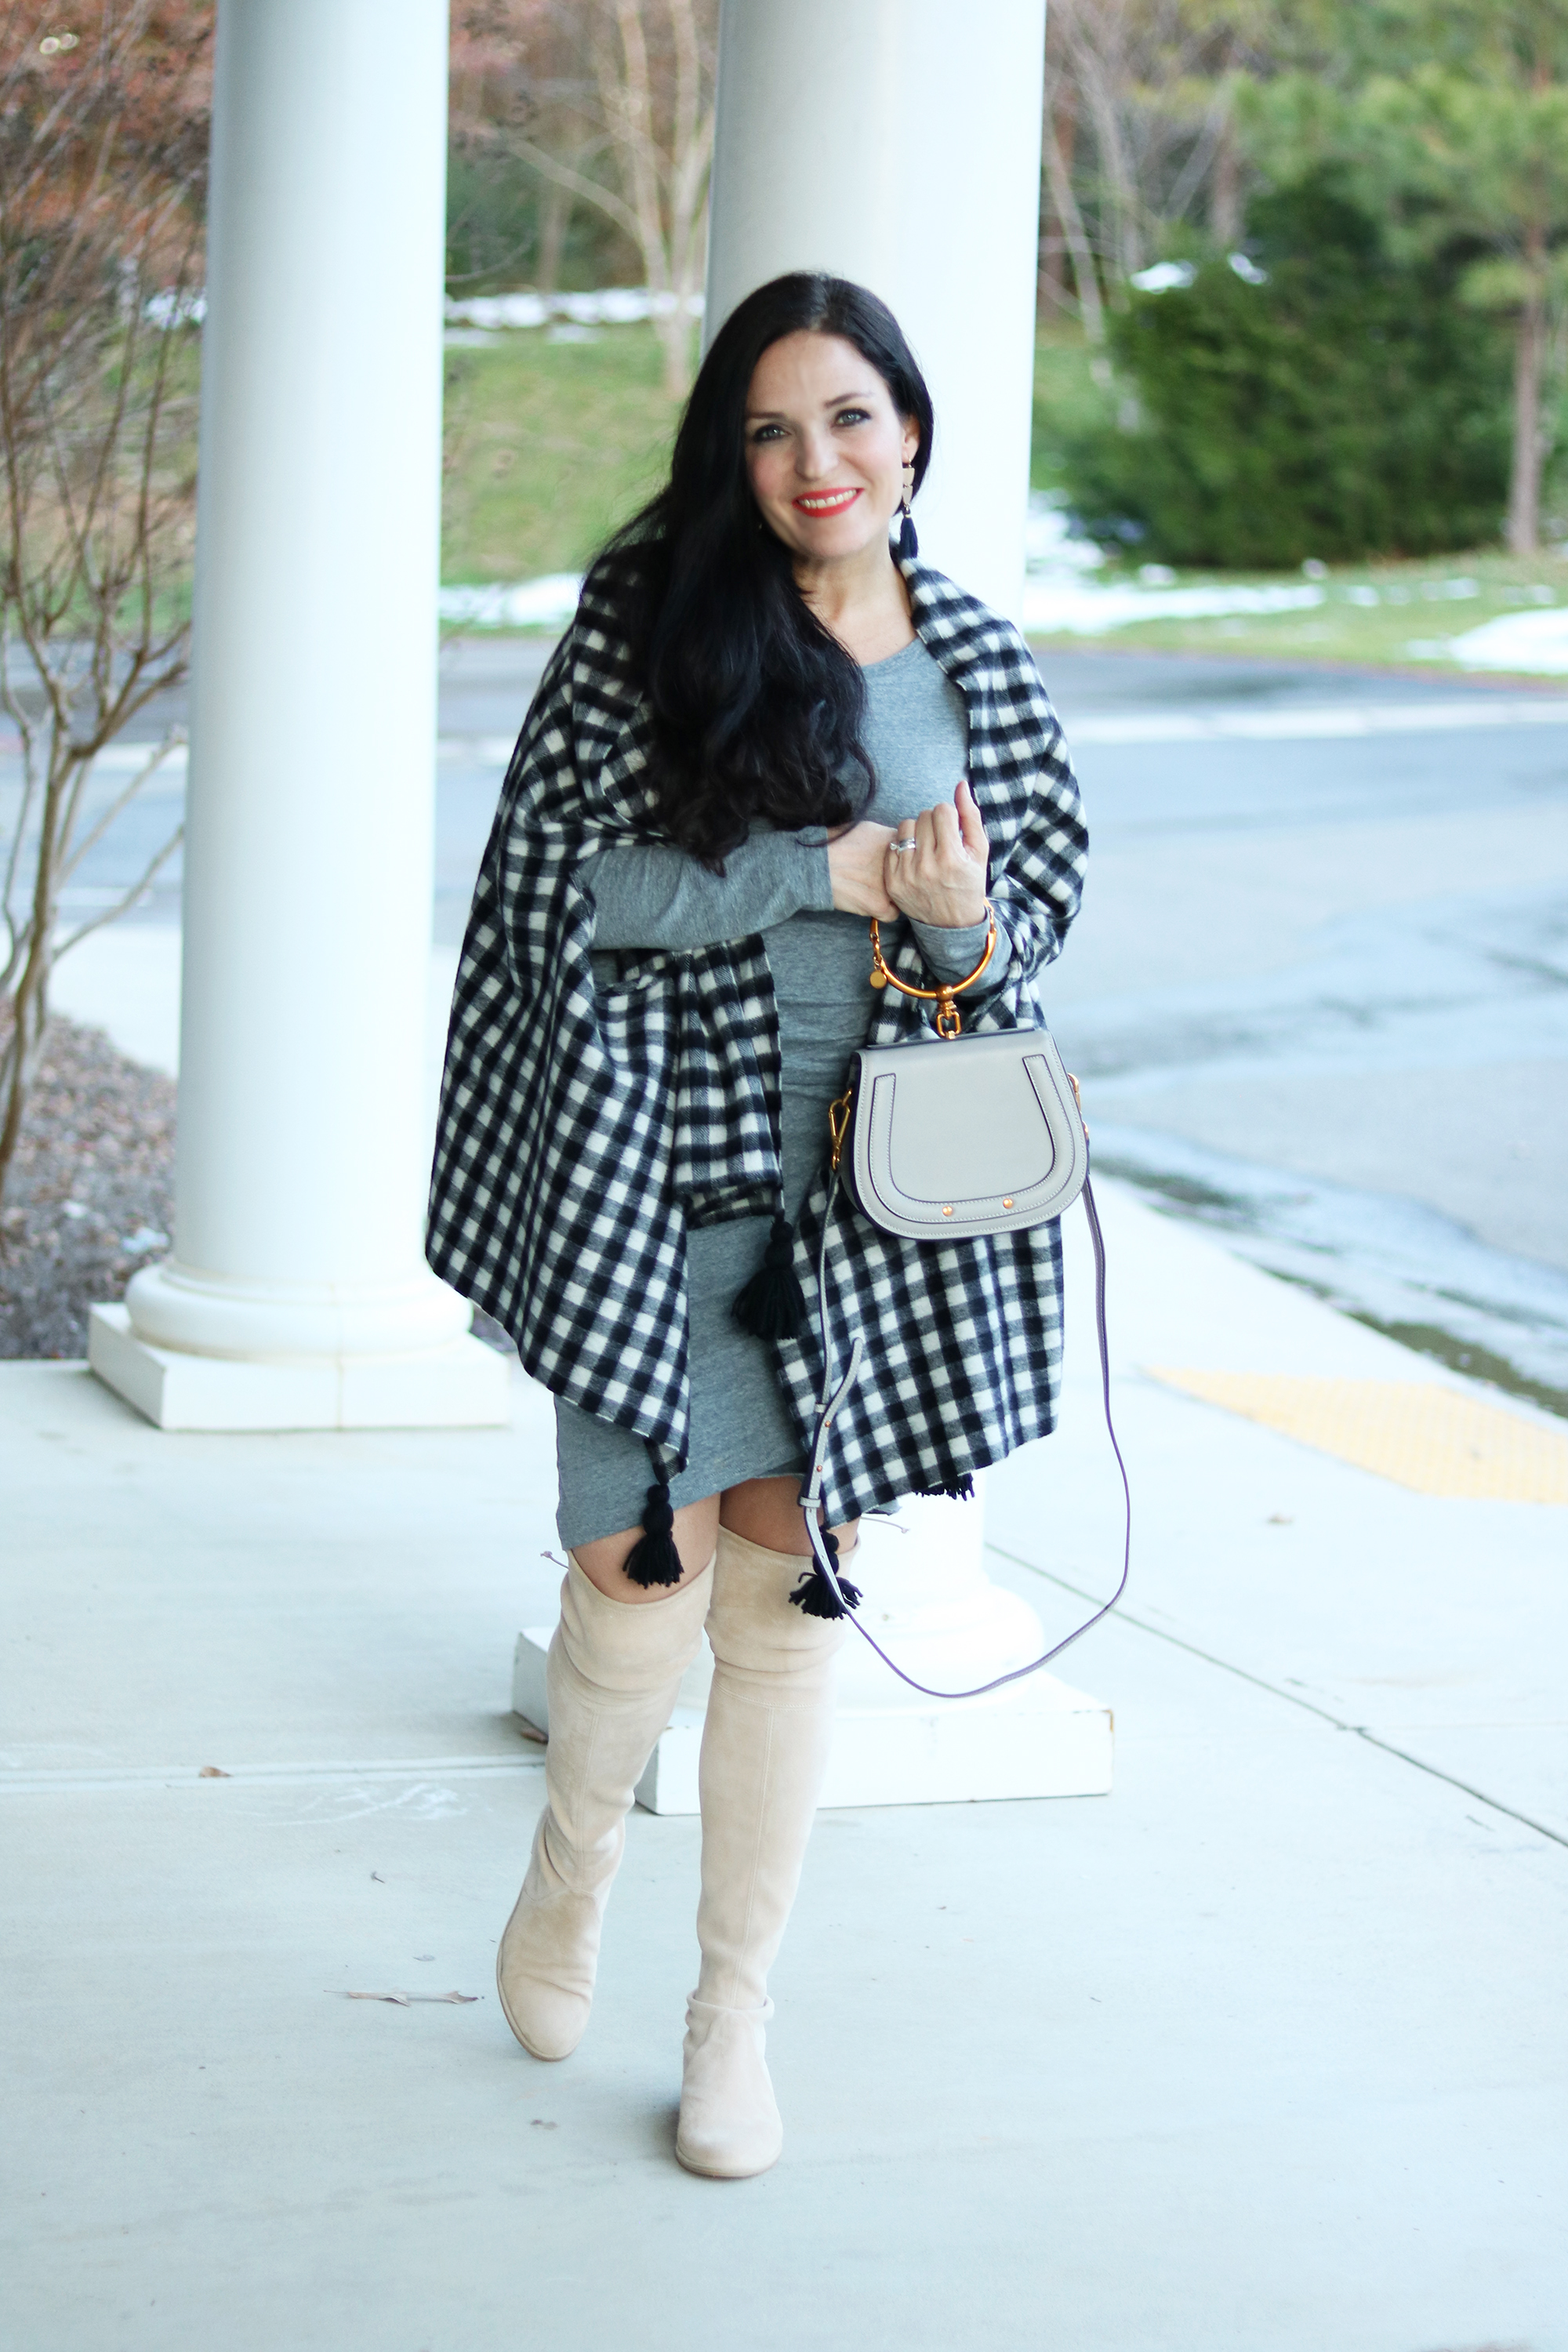 cape scarf outfit, cape scarf Jcrew, Cape scarf pattern, cape shawl, winter cape scarf, how to wear cape scarf, cape scarf wraps, cape scarf with boots, plaid cape scarf, casual cape scarf, cape scarf ideas and inspiration, blanket coat, simple blanket wrap, cold weather, made well, over the knees winter outfit style